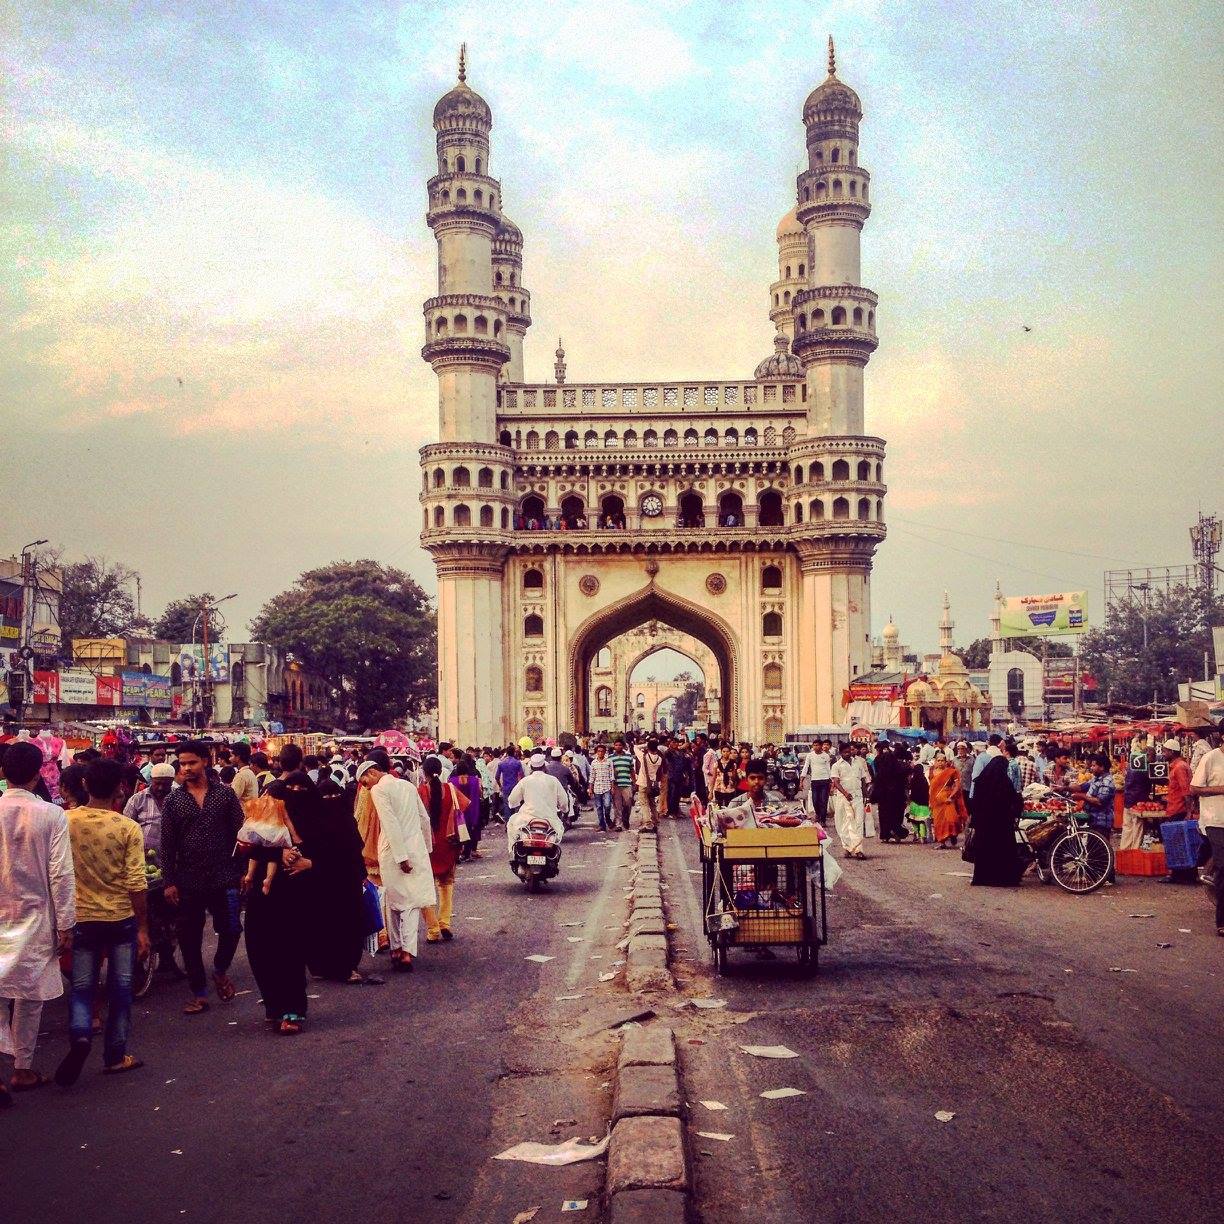 charminar in the centre of a road hyderabad, it'a one of the most beautiful temples in india